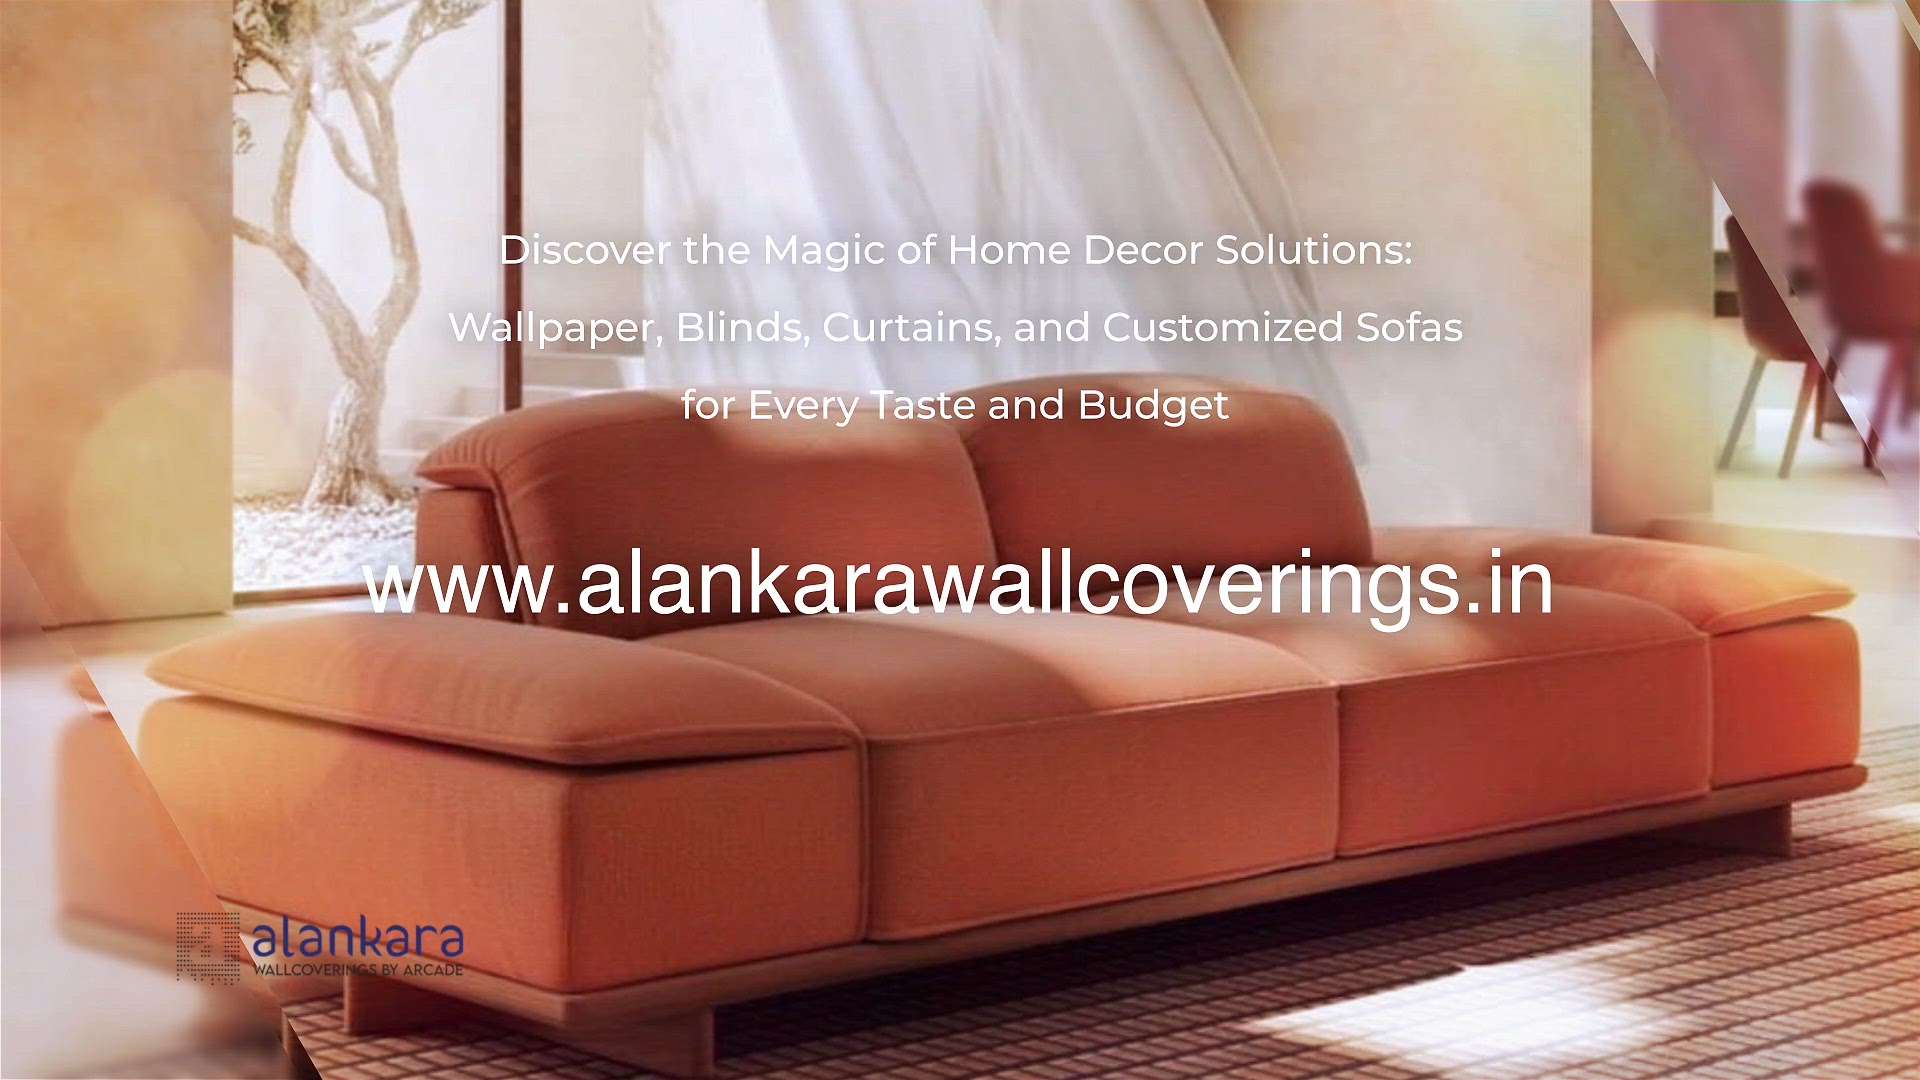 Alankara Wall Coverings offers a range of home decor solutions including wall papers, blinds, curtains, and customized sofas, all tailored to suit your personal taste and style. From elegant and classic to contemporary and modern, their expert team of designers can help you create a beautiful and functional living space that reflects your unique personality and lifestyle. With a focus on quality craftsmanship and excellent customer service, Alankara Wall Coverings is the go-to destination for all your interior design needs.

Wonderful Walls. Wonderful Homes. Alankara Promise

Aluva & Calicut 
 Call : 8089181314,  9995340439

Bangalore 
 Call :8129773421, 9995340439

#AlankaraWallCoverings #HomeDecor #Wallpapers #Blinds #Curtains #CustomizedSofas #InteriorDesign #PersonalStyle #QualityCraftsmanship #ExcellentCustomerService #BeautifulLivingSpace #UniquePersonality #Lifestyle
#HomeRenovation #InteriorDecorating #DesignInspiration #HomeImprovement #StyleYourSpace #CustomFurniture #Window